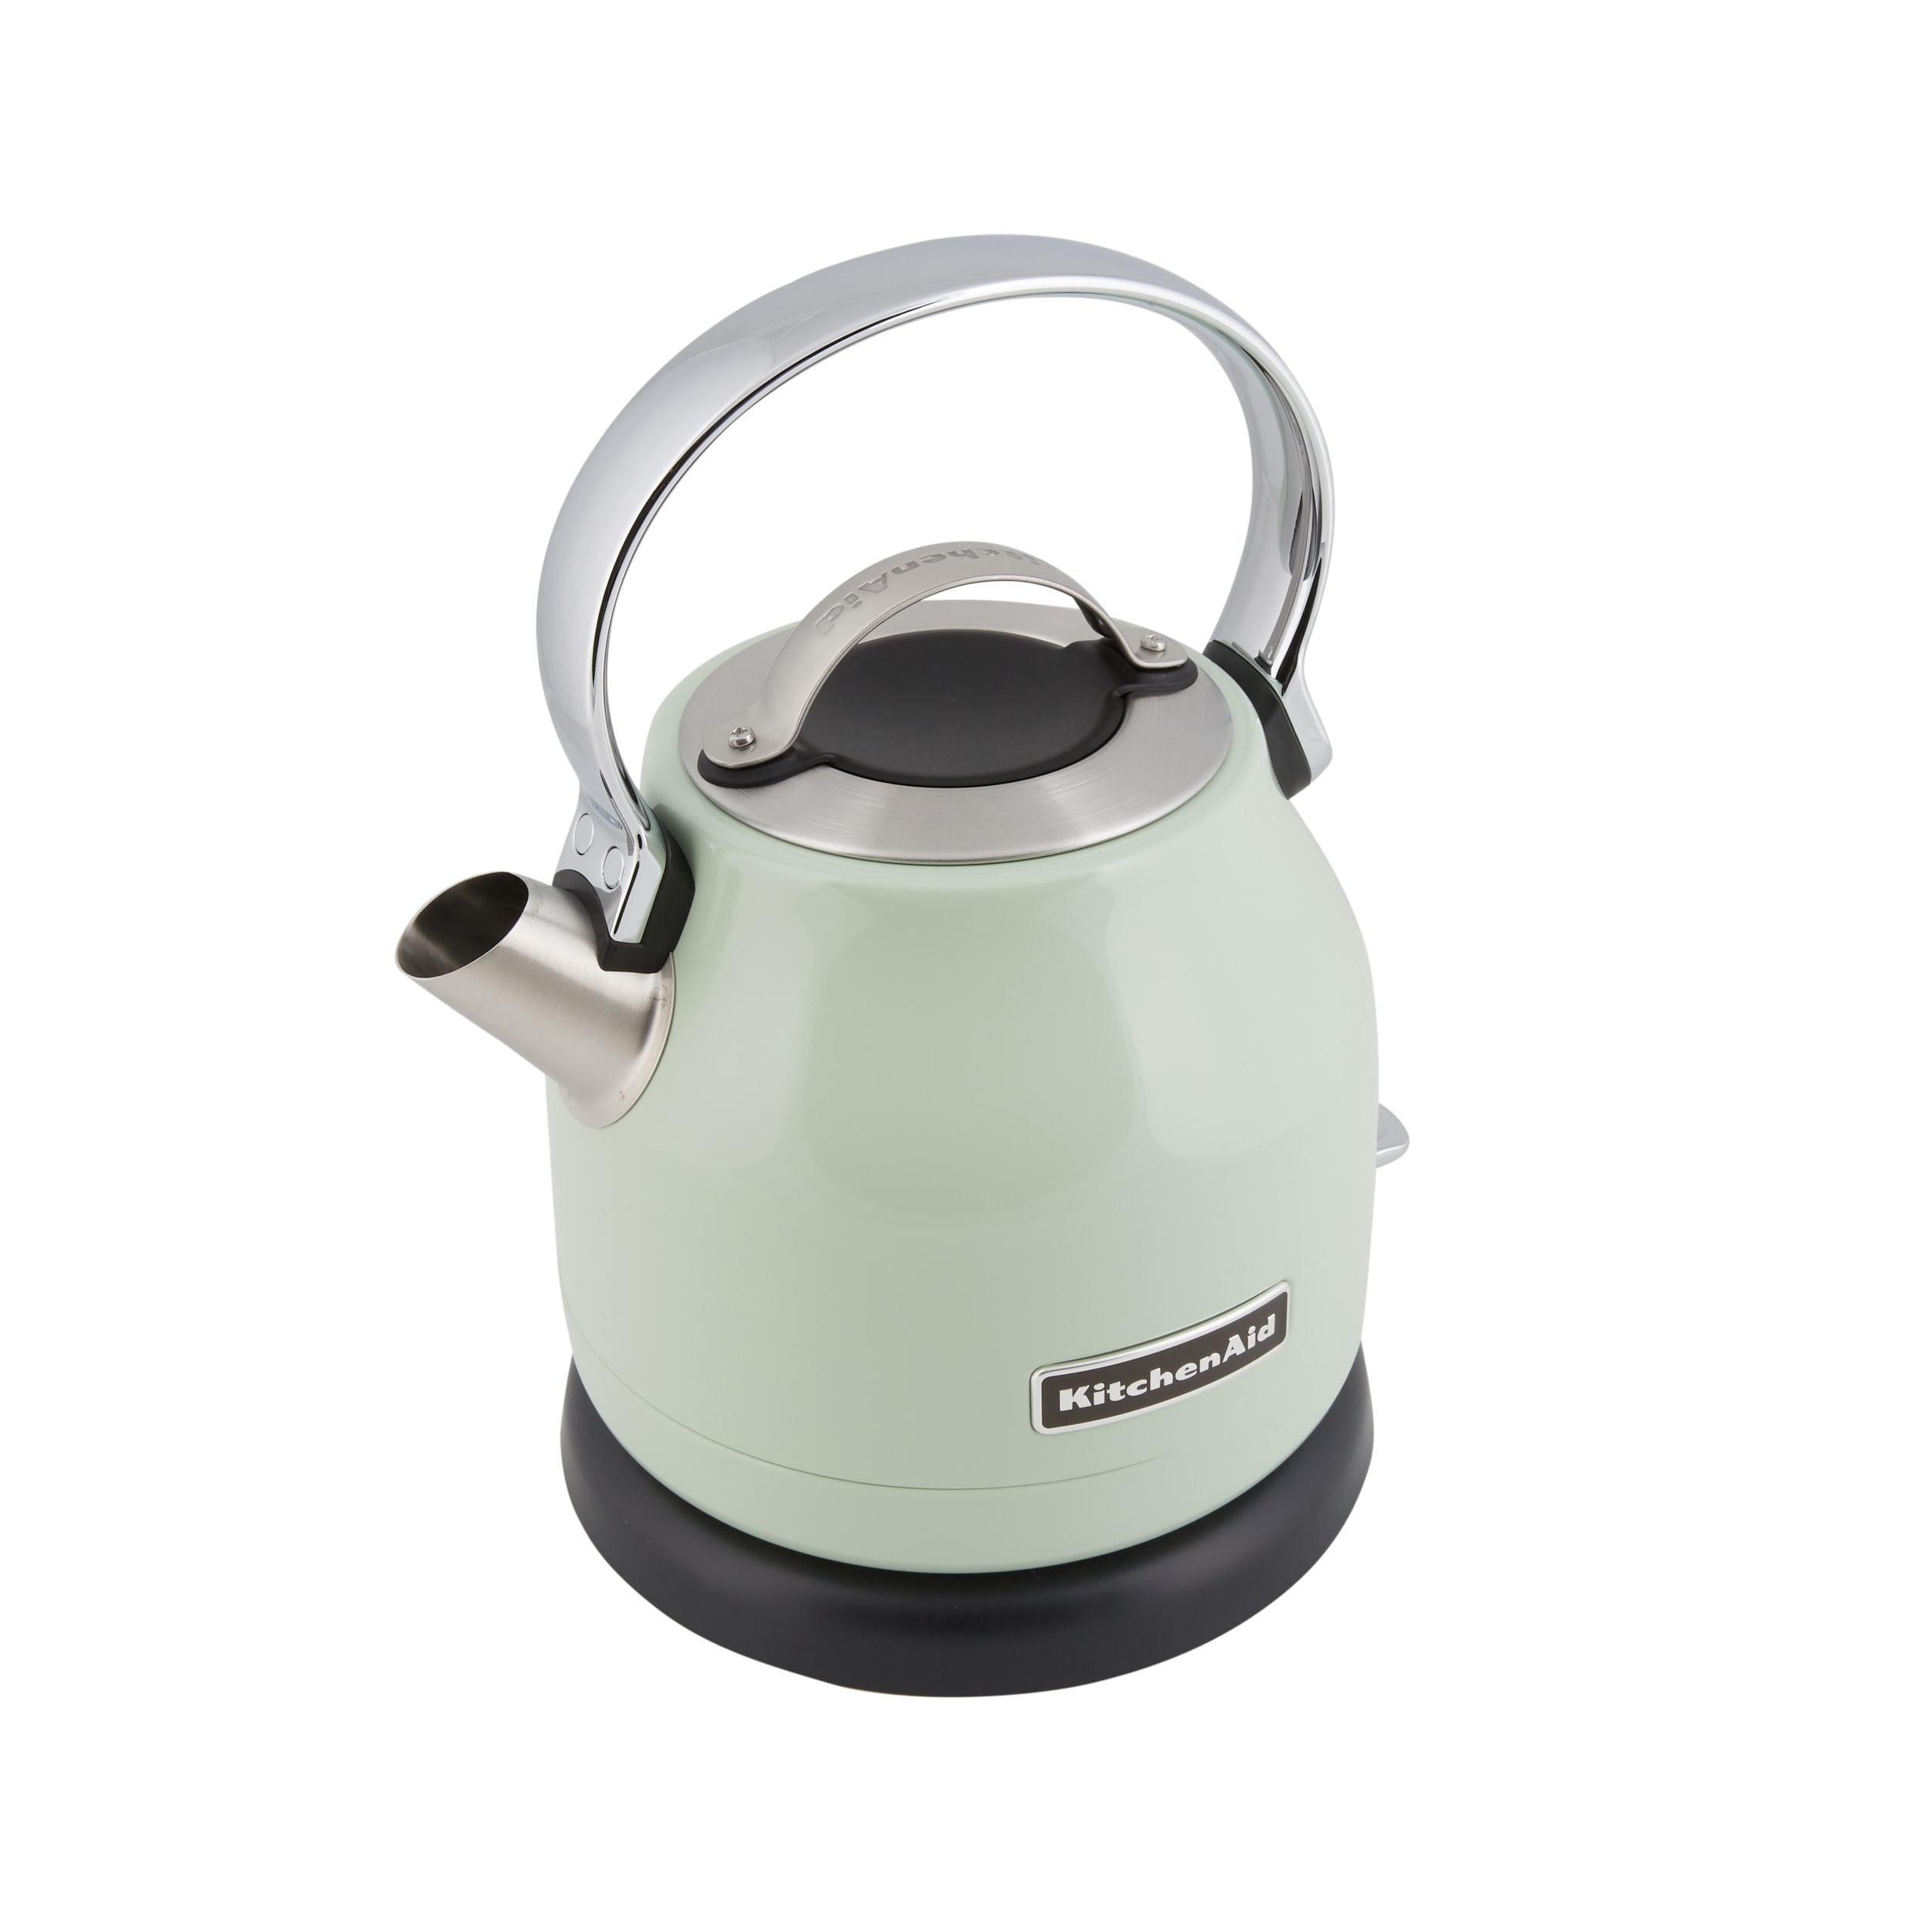 KitchenAid Pistachio 5-Cup Corded Manual Electric Kettle at